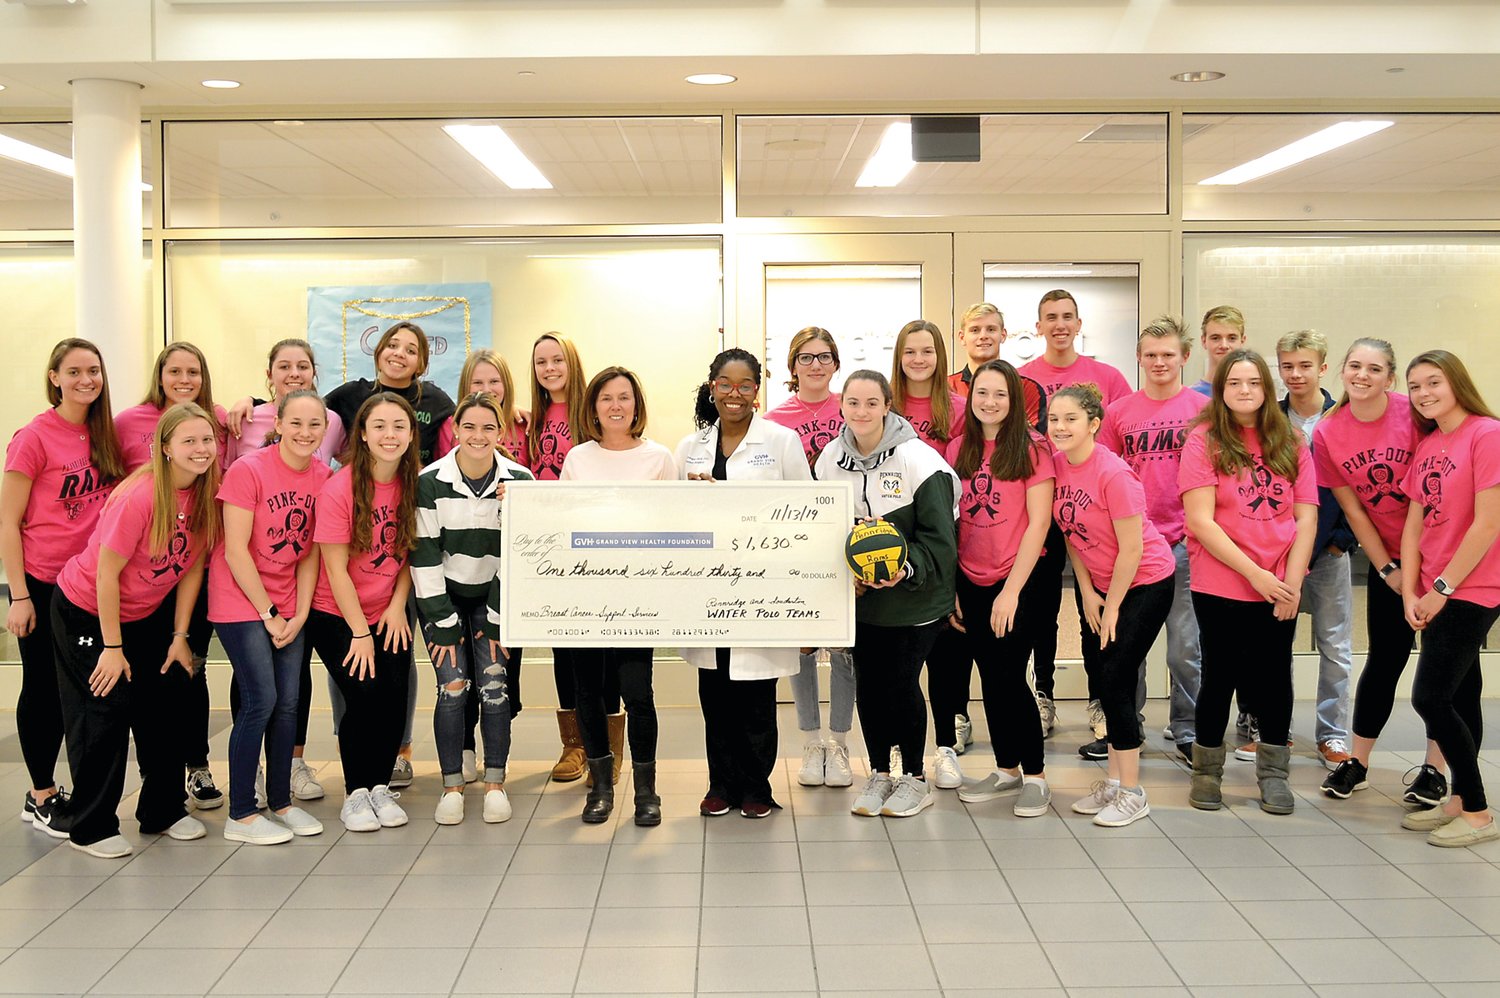 Members of the Pennridge and Souderton High School water polo teams join Vickie Keeler, executive director, Oncology Service Line, Grand View Health, and Dr. Monique Gary, breast surgical oncologist, Grand View Health, at the check presentation. Students, from left, are: front row, Halle Casper, Raegan Vesey, Lea Preston, Hope Garges, Kerry Miller, Ava Conolly, Alysha Eby, Summer Stephens, Lindsay McMackin, Hannah Christie; back row, Abby Nuneviller, Samantha Ackley, Hannah Keyser, Hannah Sayre, Tess McLaughlin, Ady Garges, Samantha Darrell, Lauren Scott, Will Leyland, Kristian Stanczewski, Liam McLaughlin, Zachary Yardley and Jack Pearson.